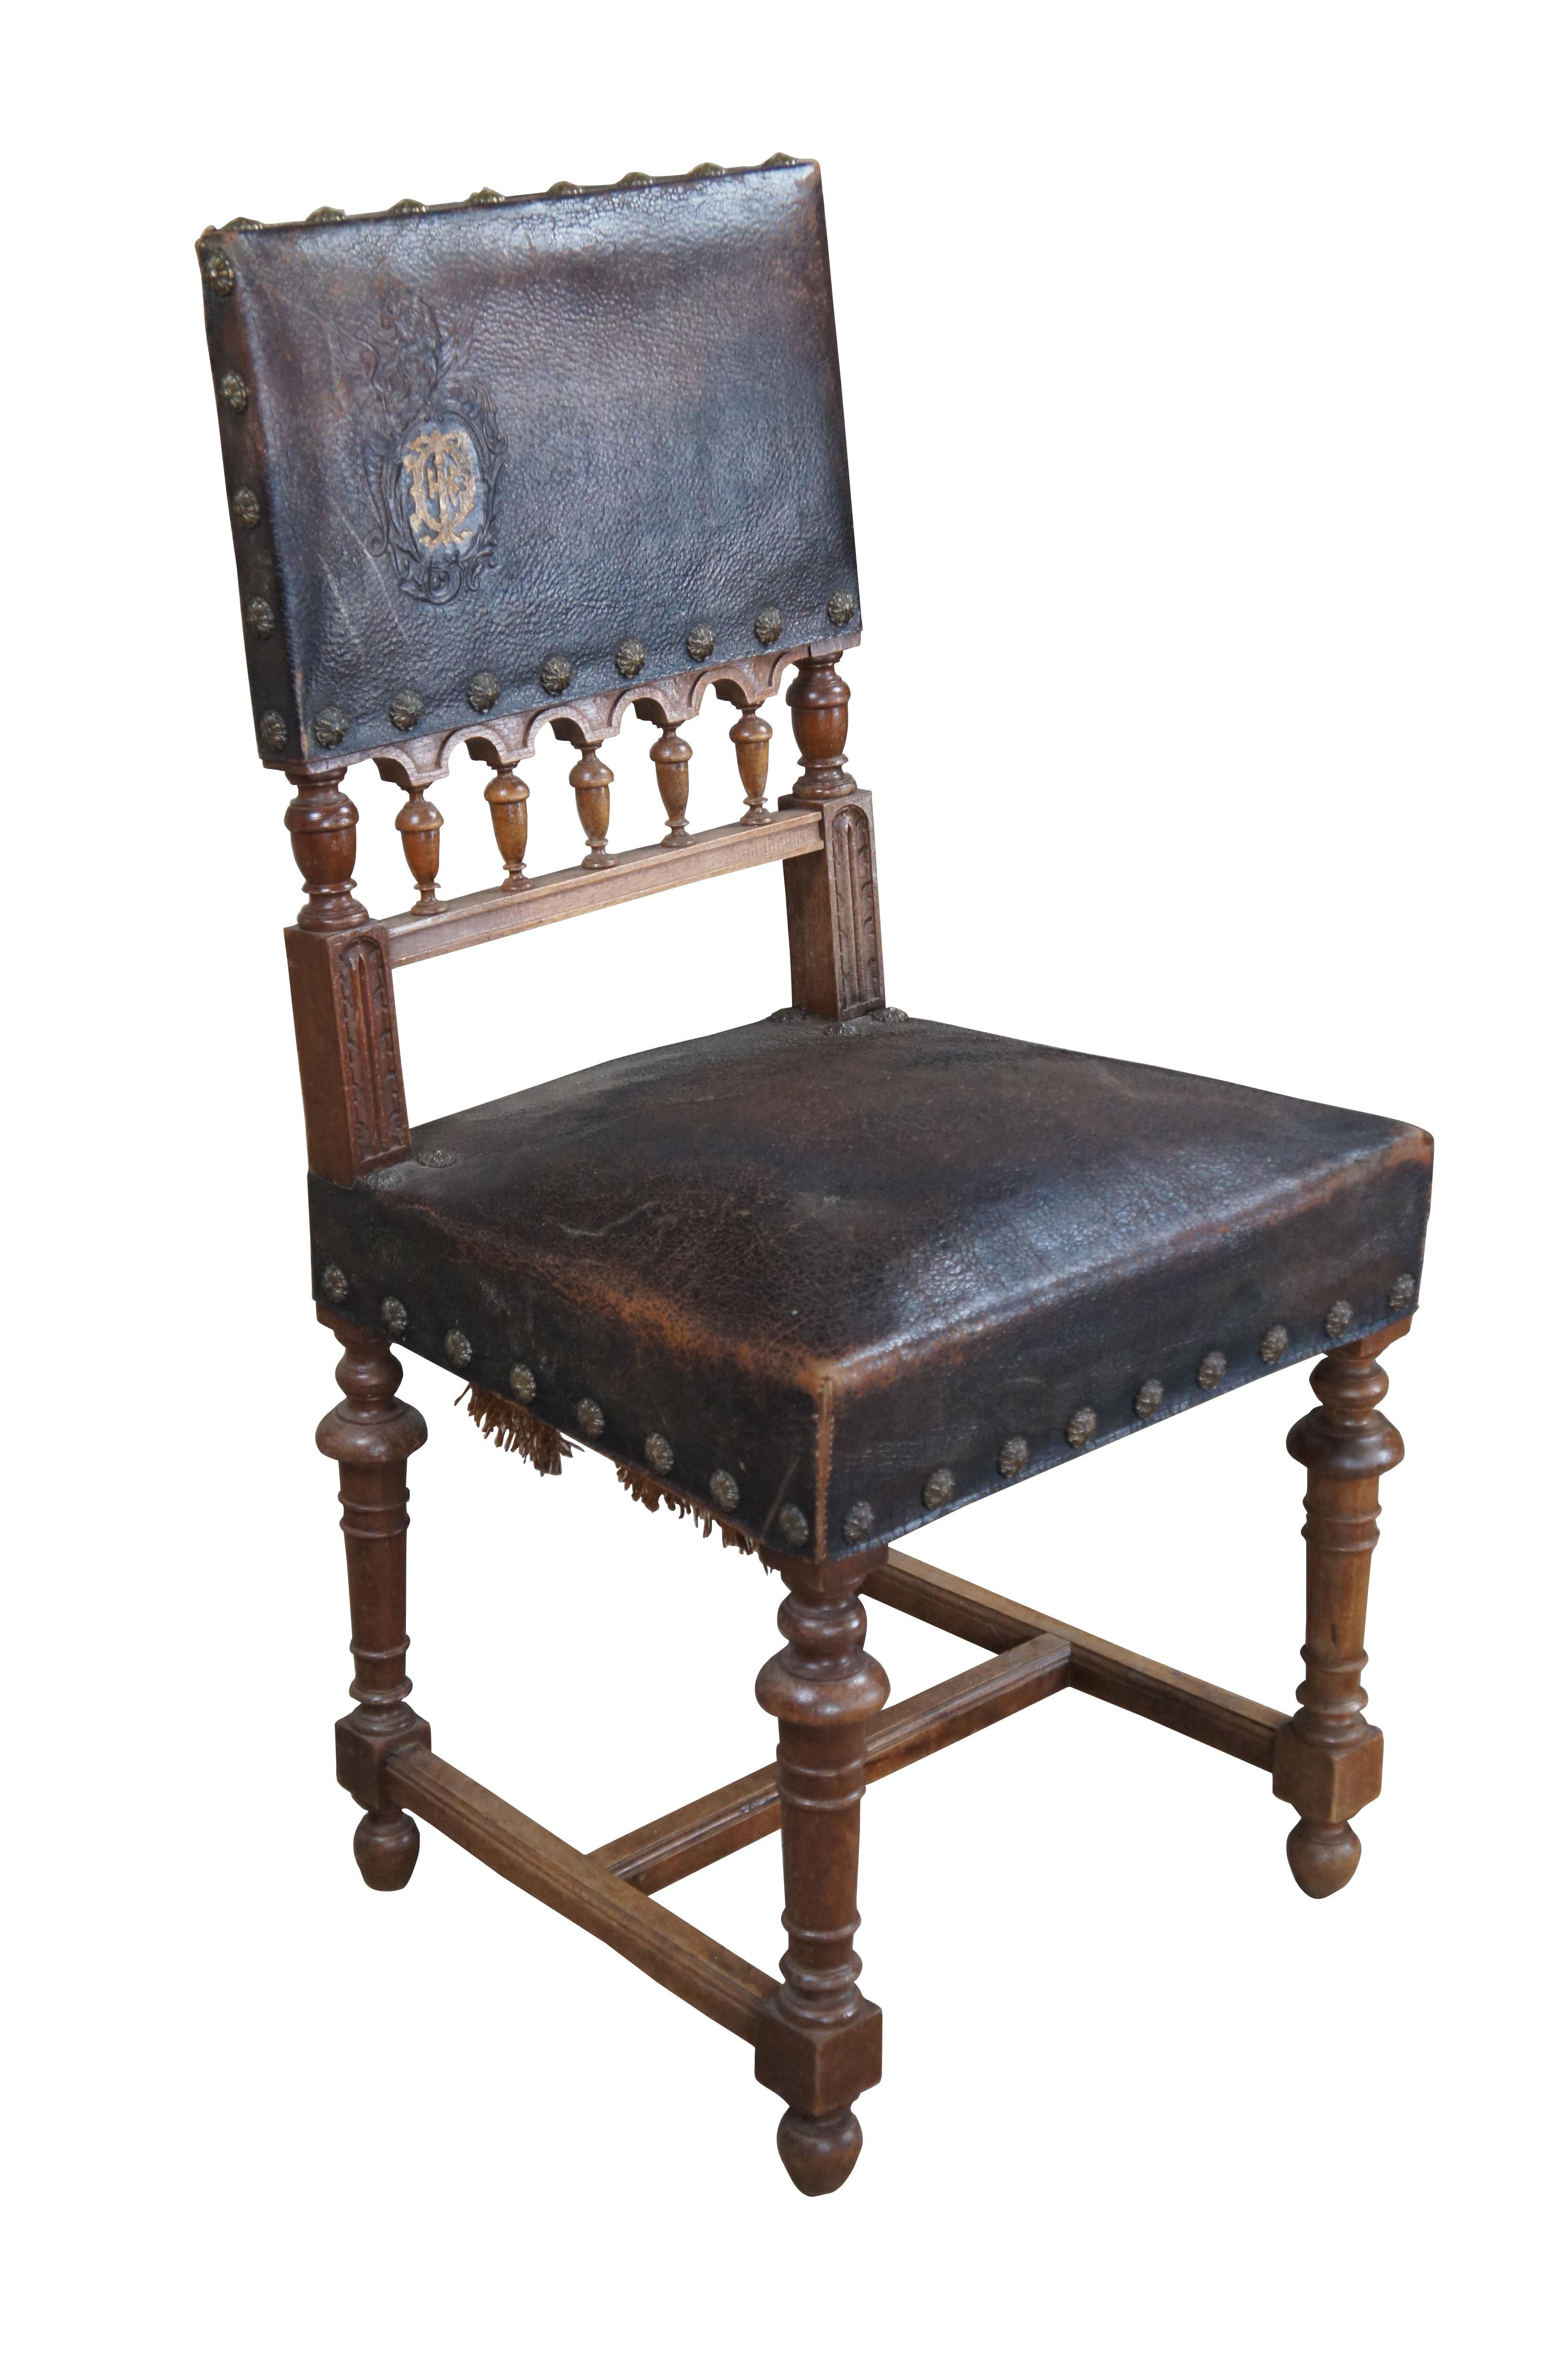 Antique Henry II style dining side chair, circa 1880s. Made from walnut with an embossed leather back featuring a crest and winged griffon. The lower back of the chair showcases an carved arvade with turned finials. Chair stiles have a carved